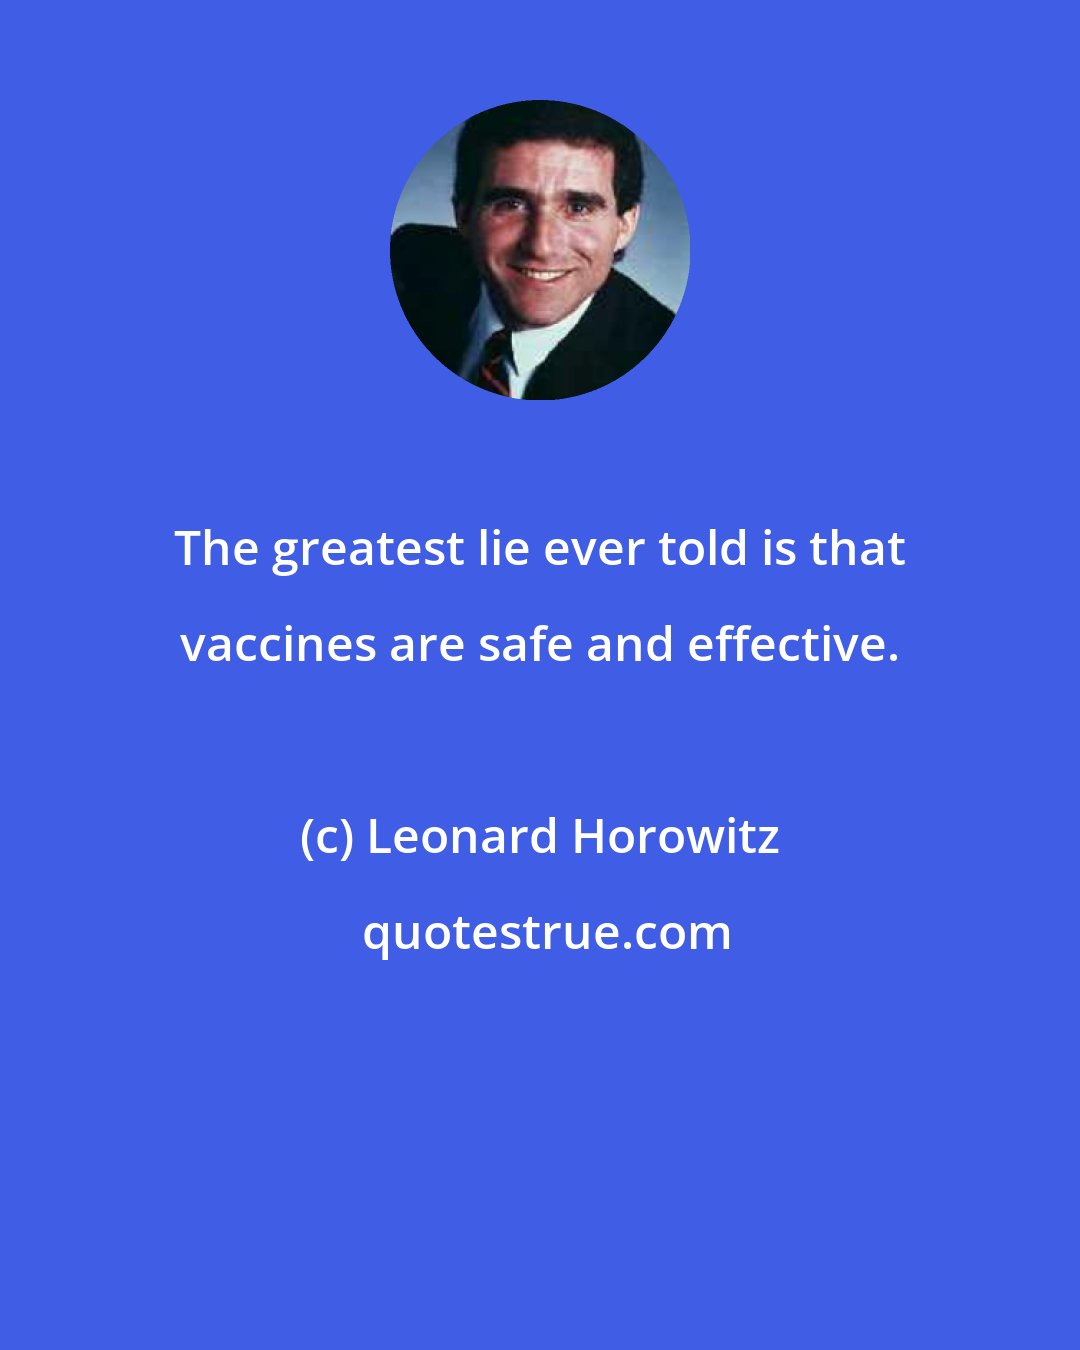 Leonard Horowitz: The greatest lie ever told is that vaccines are safe and effective.